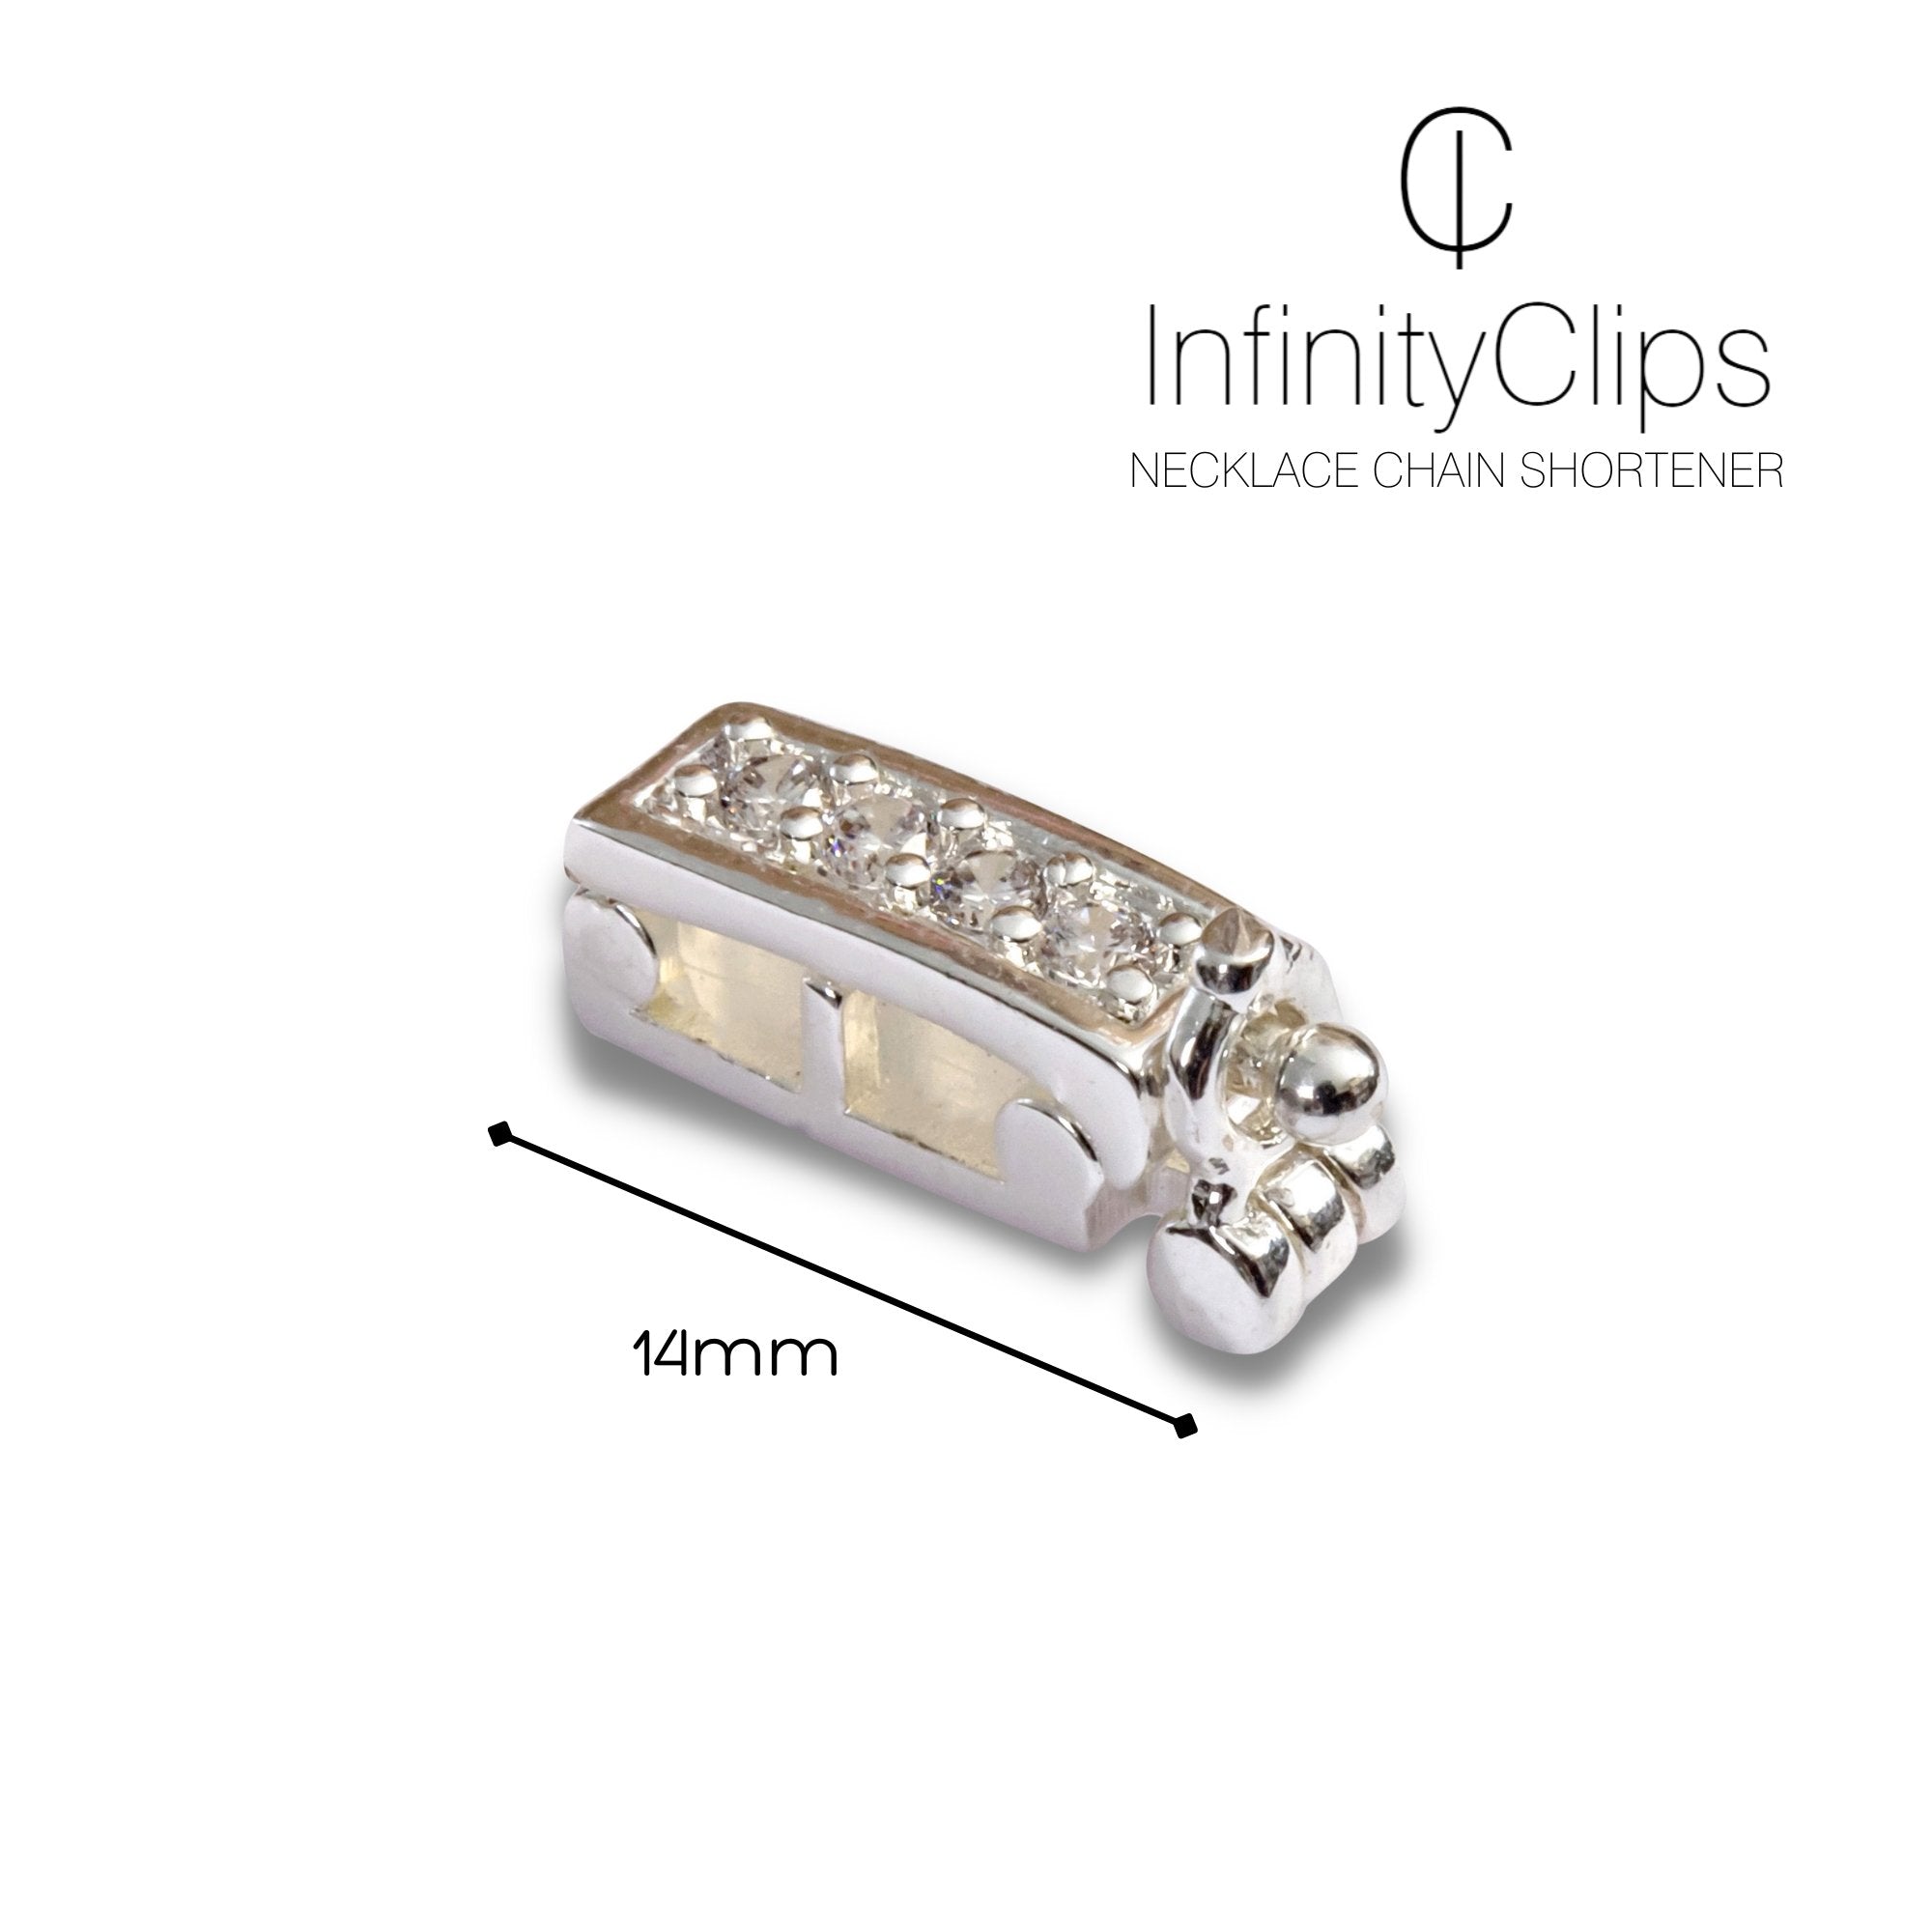 Small Classic Necklace Shortener  InfinityClips – Infinity Clips®